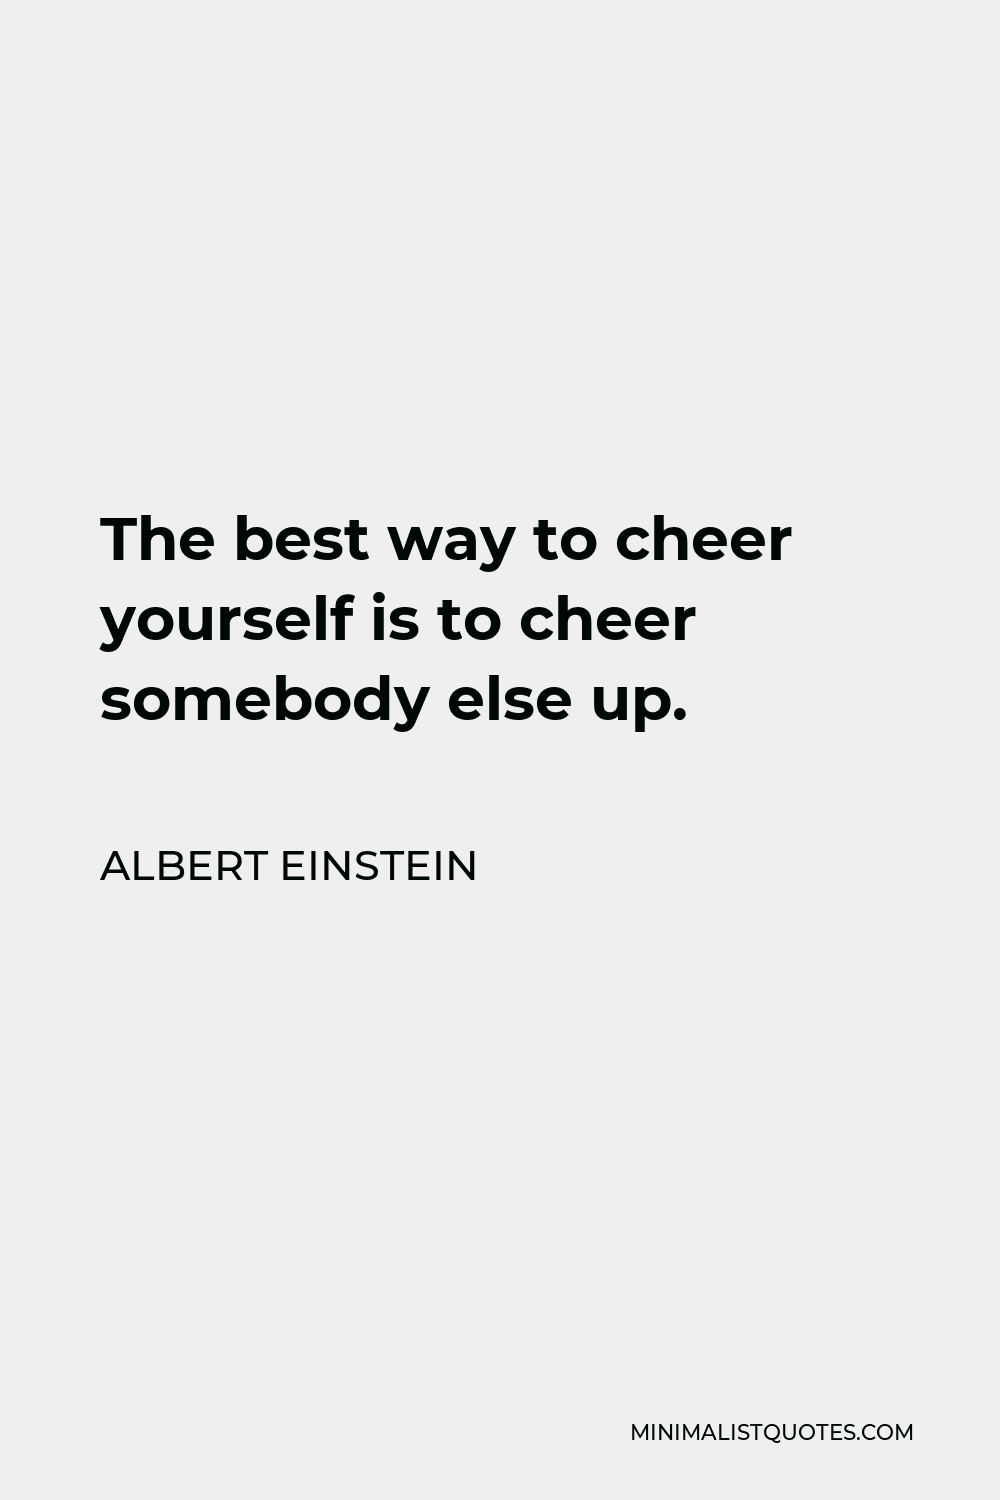 Albert Einstein Quote - The best way to cheer yourself is to cheer somebody else up.